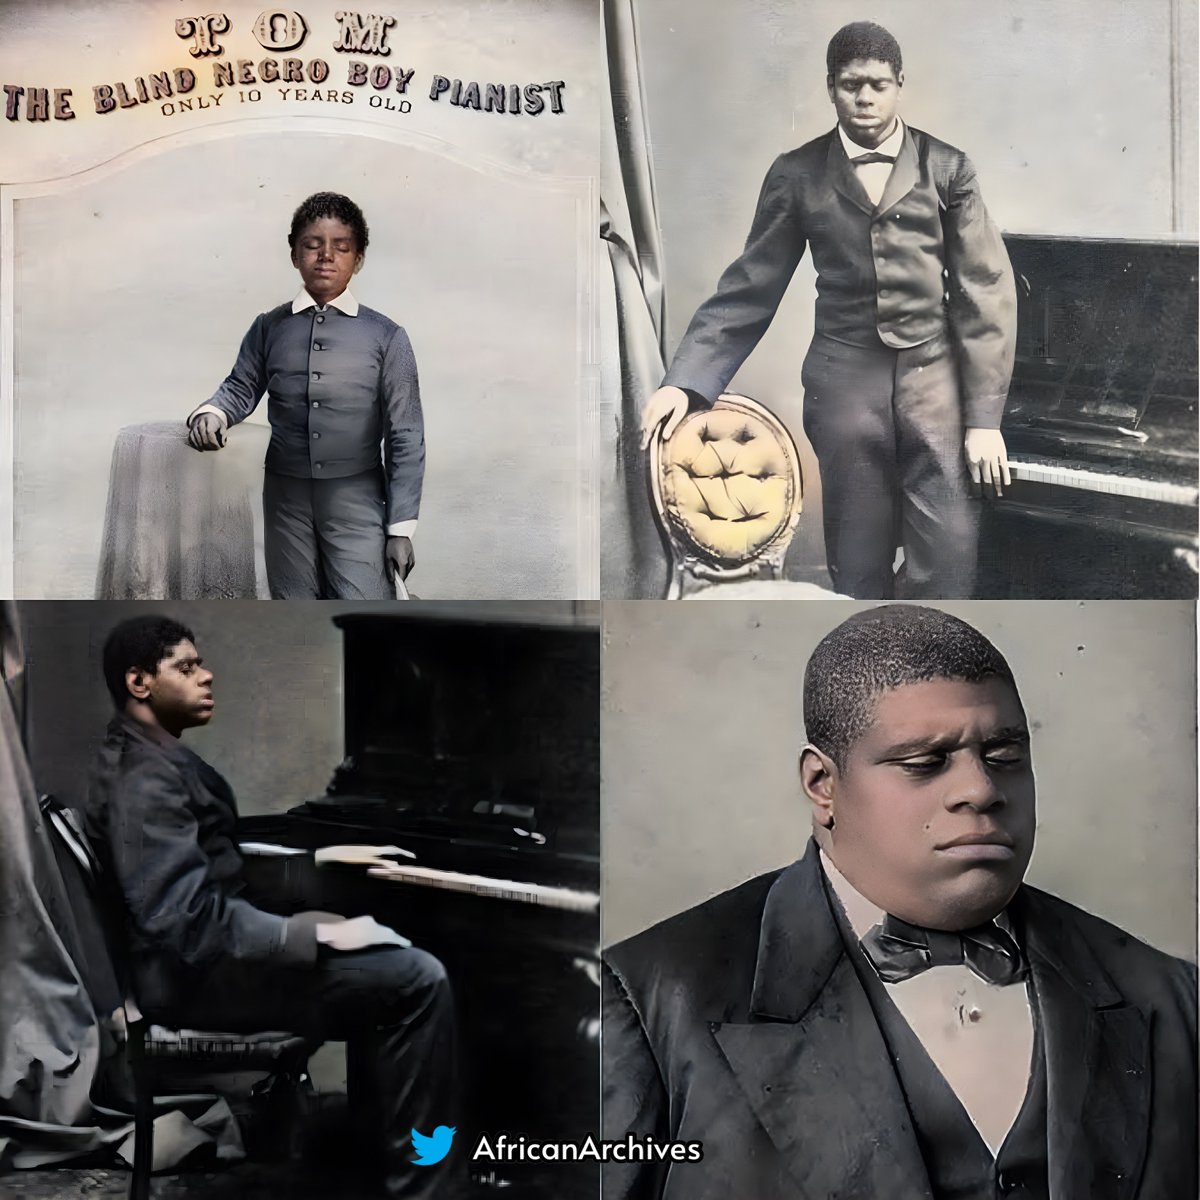 Blind Tom' Wiggins was an African American musical prodigy. Born blind, as an infant he Tom Wiggins was sold into slavery, along with the rest of his family. He also survived attempted murder as he had no economic value to his owners. However, Tom had access to a piano, and his…